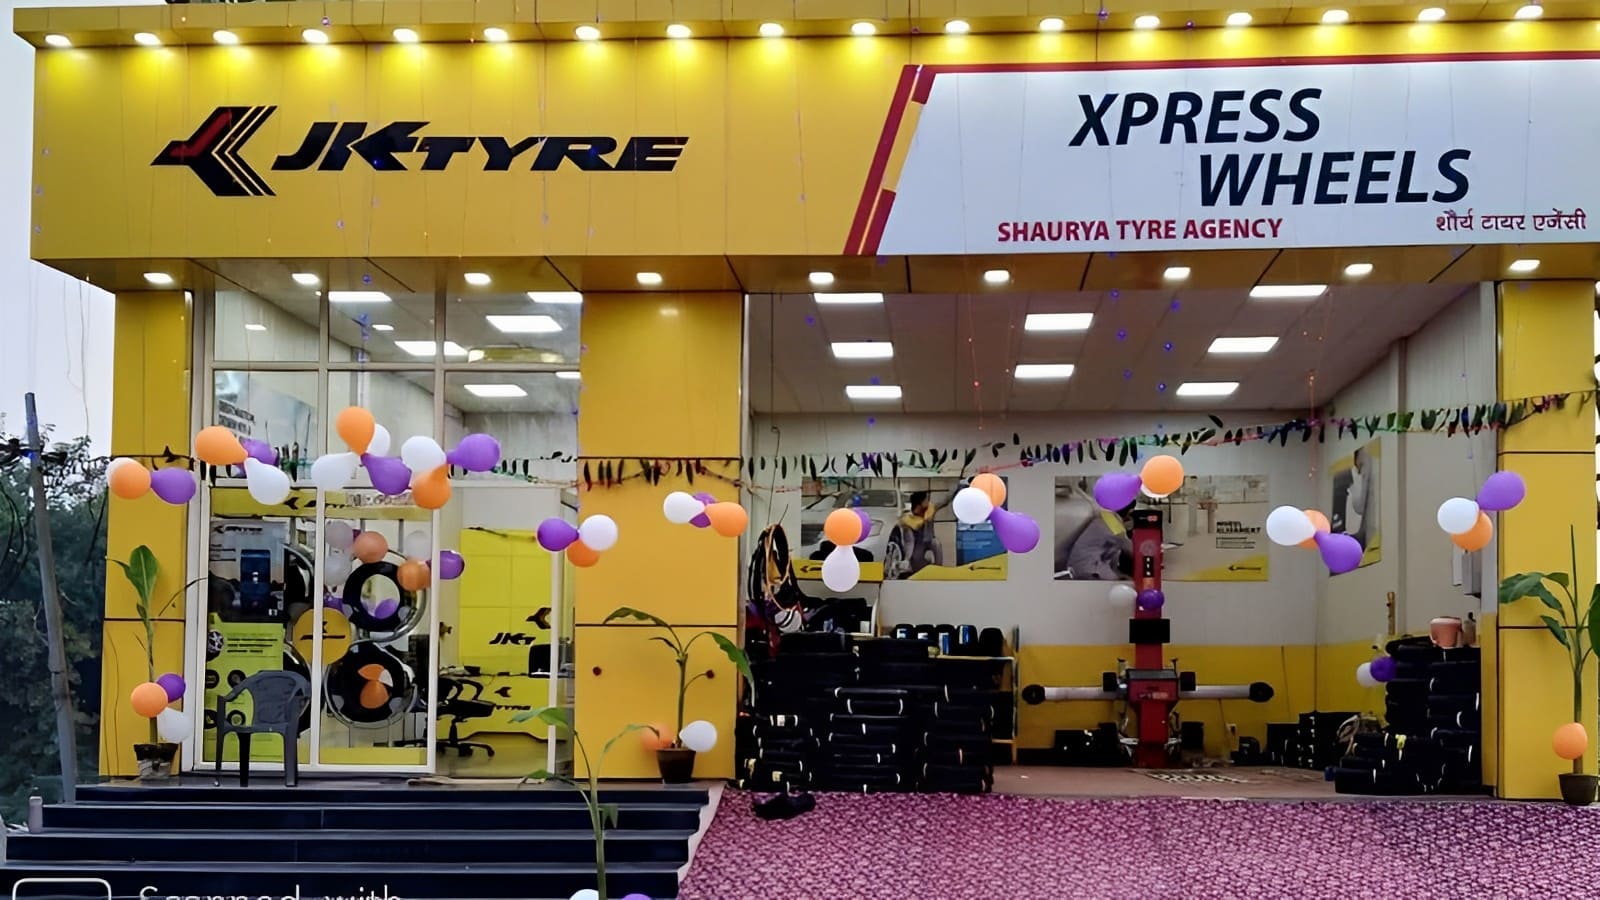 International Finance Corp Acquires 5.6% JK Tyre Stake for $30M